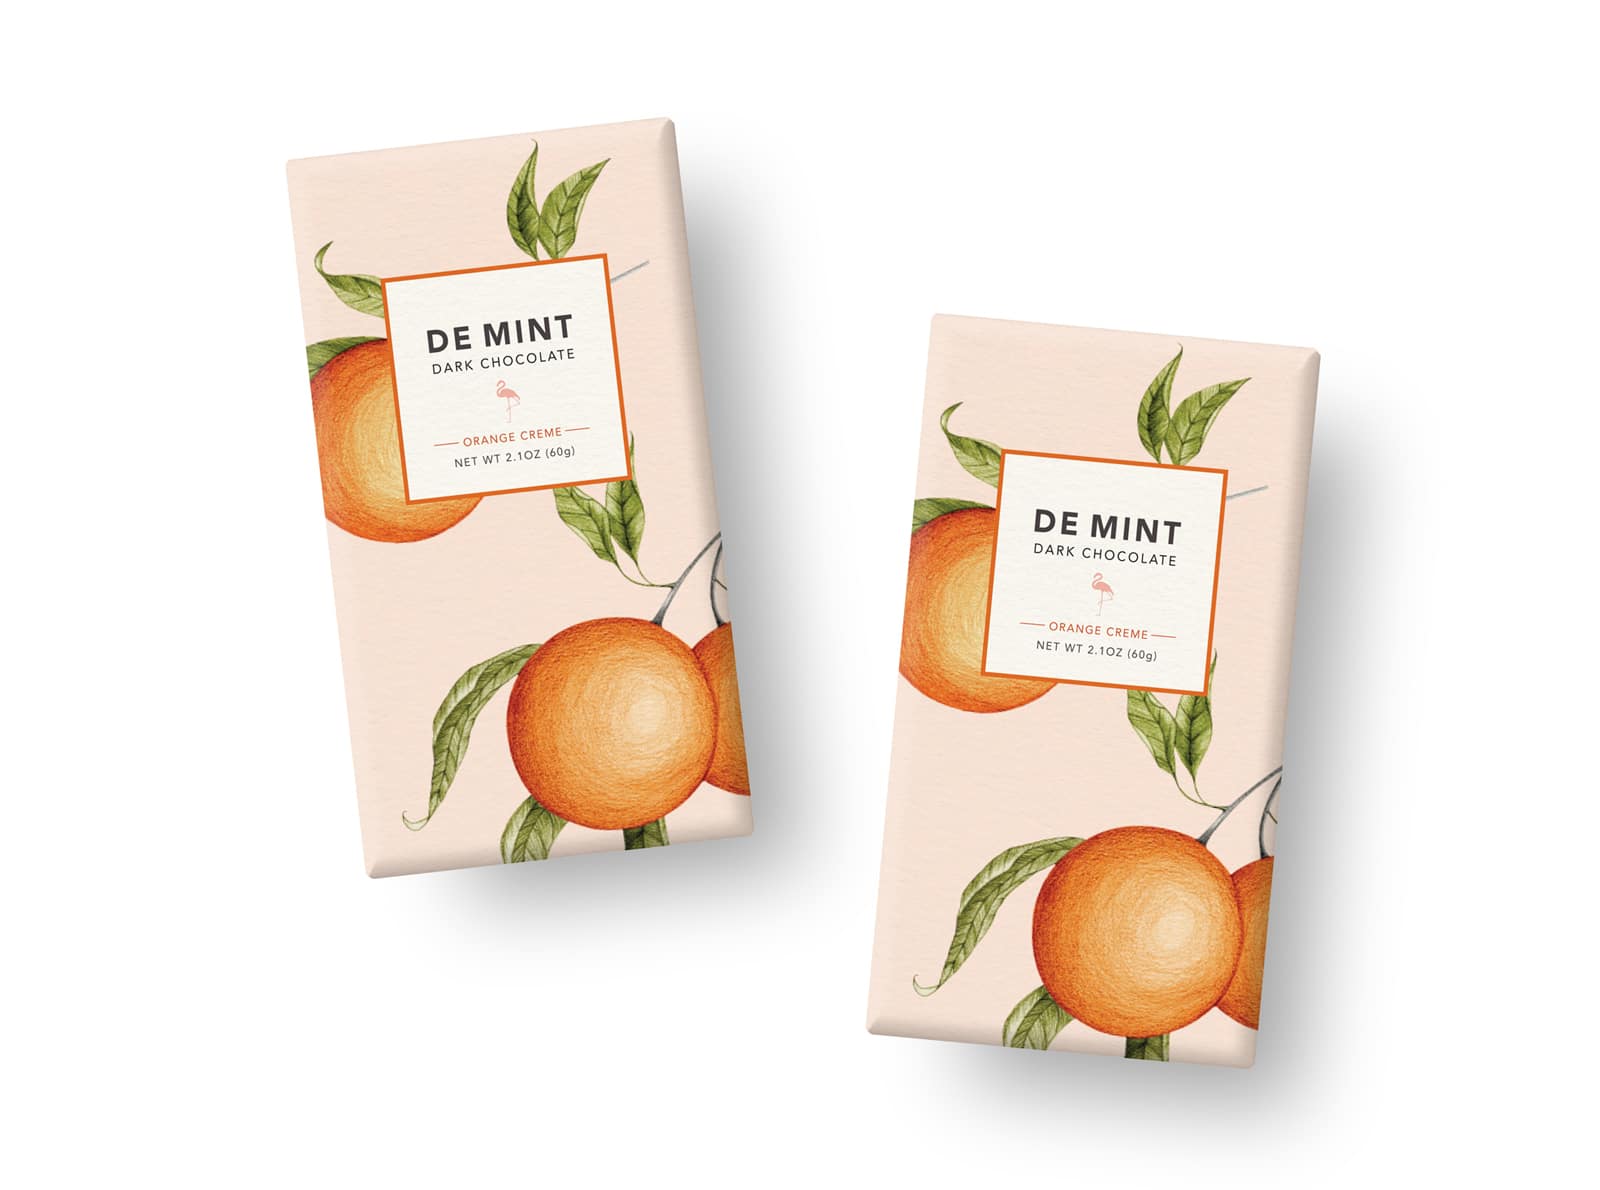 The chocolate bar packaging design features a muted pink background with pops of earthy green in the oranges highlighting the botanical essence of the illustrations.